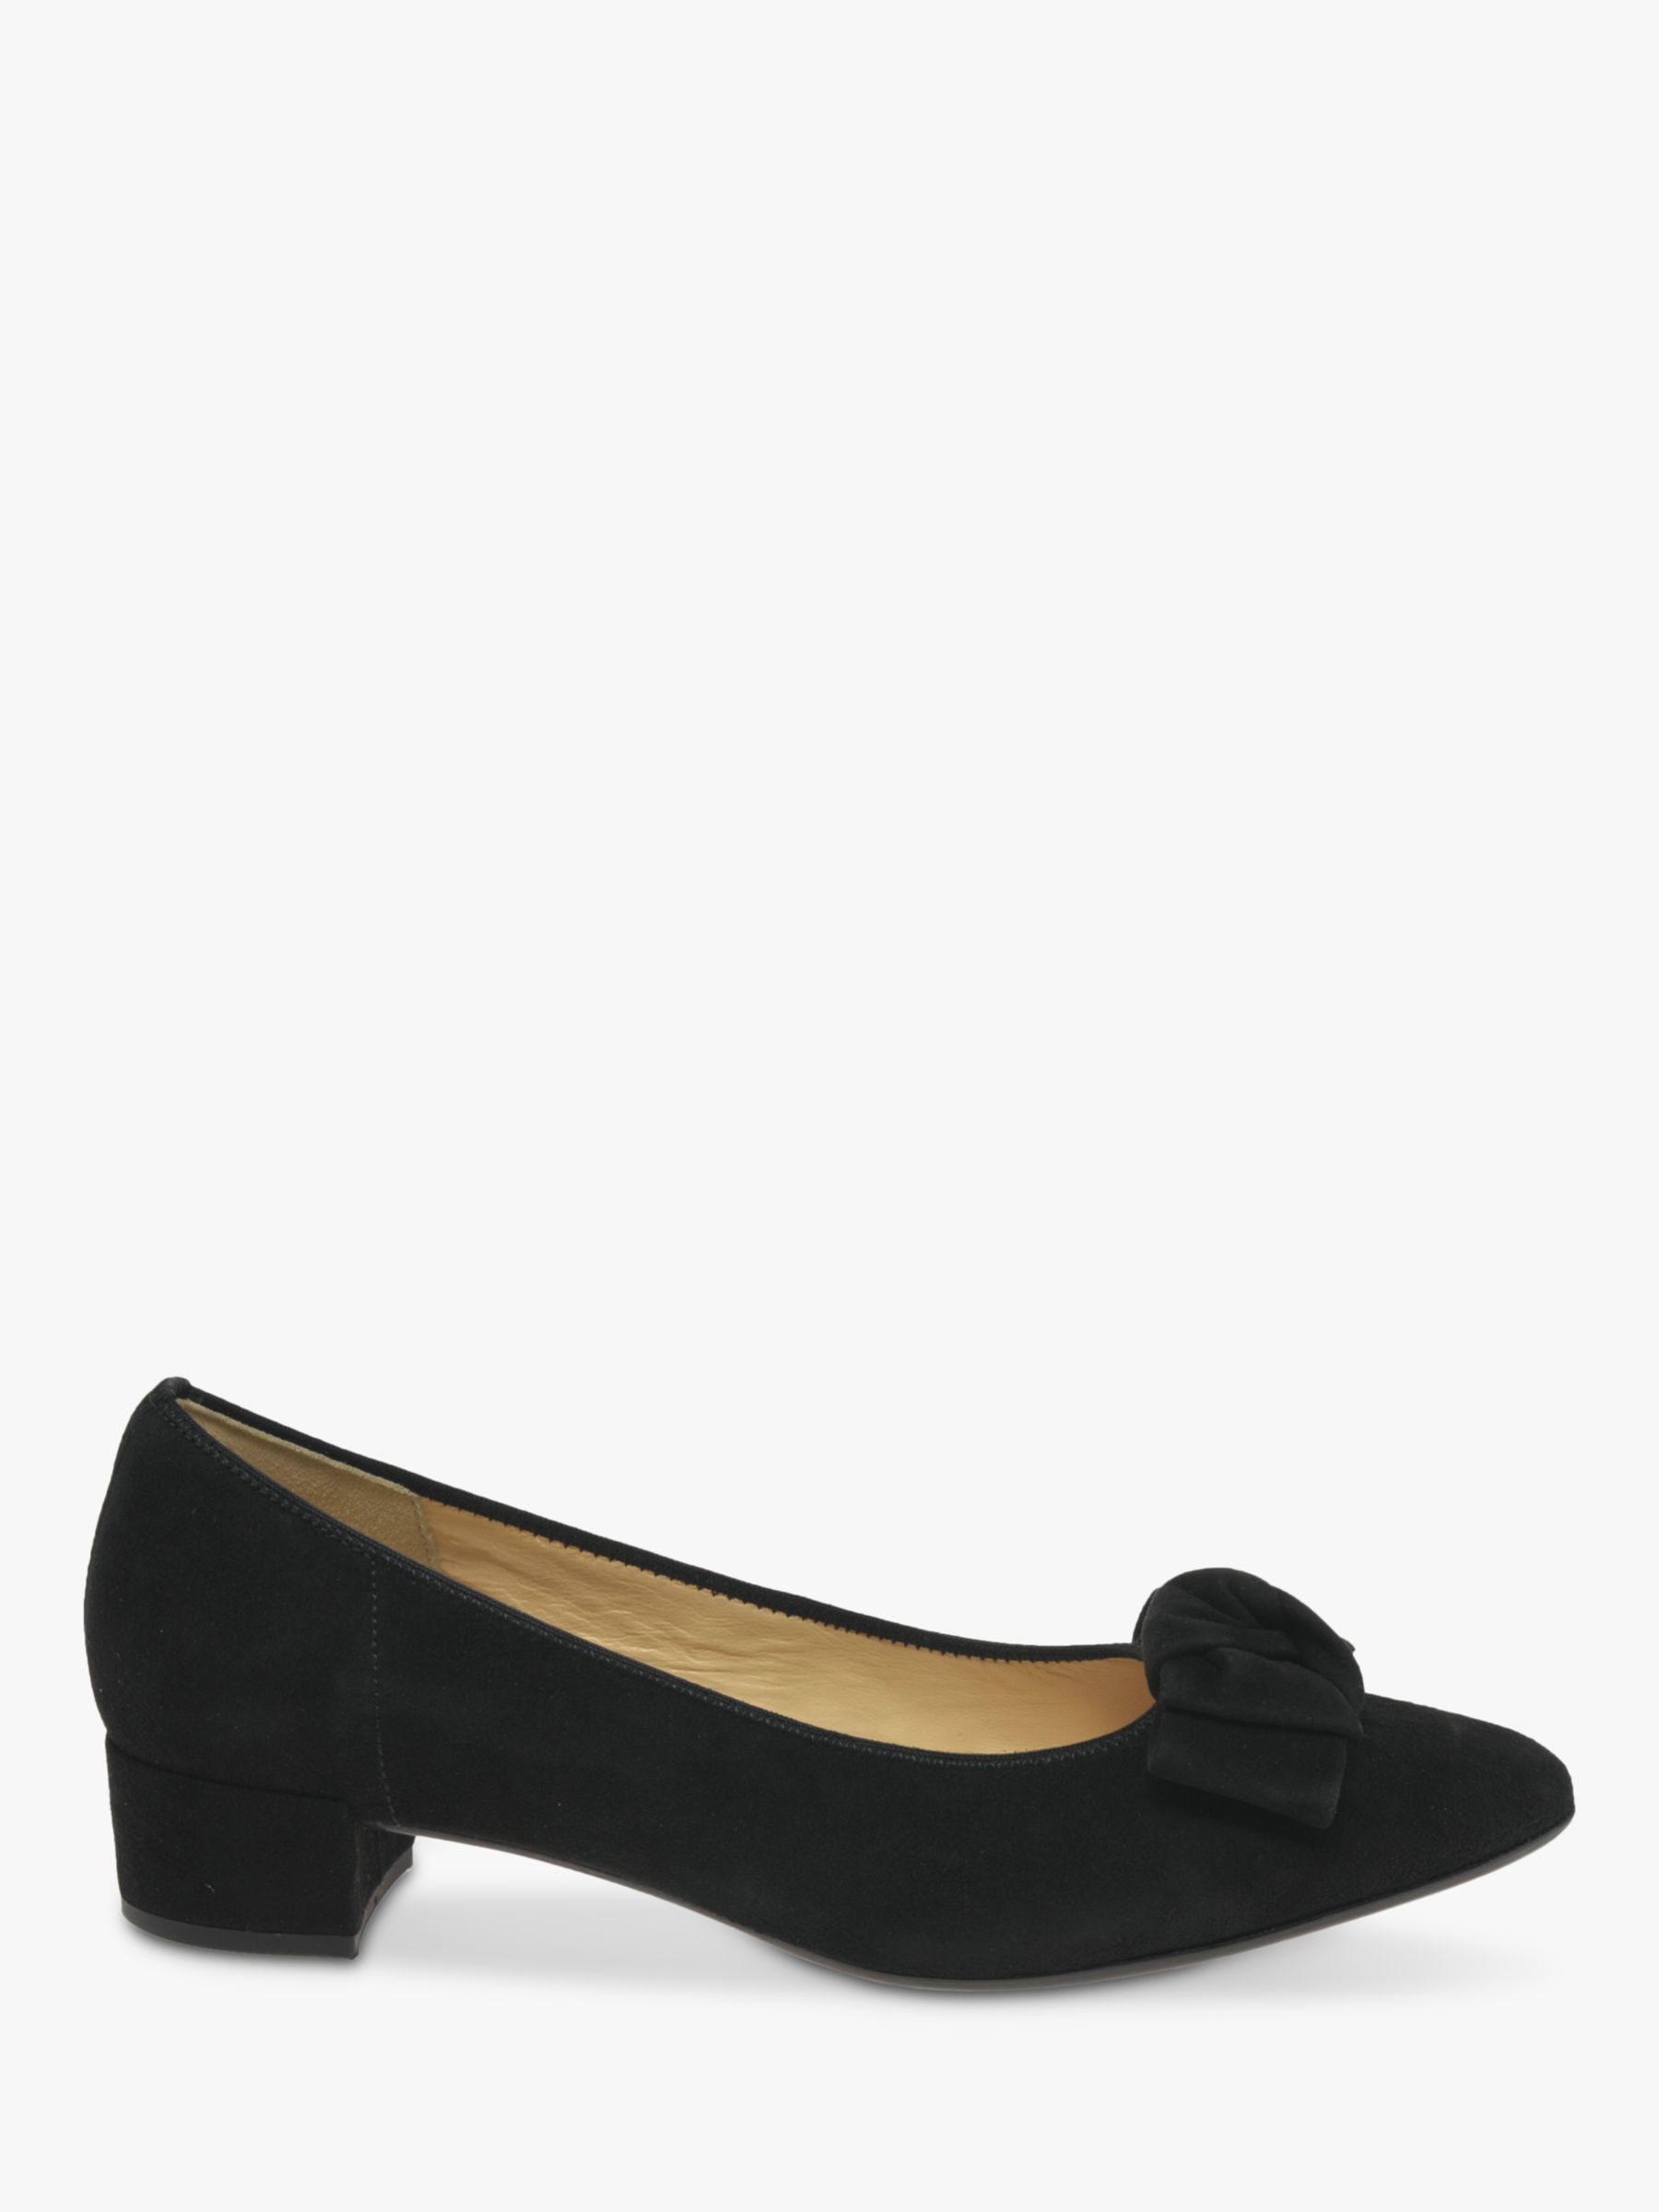 john lewis clearance gabor shoes